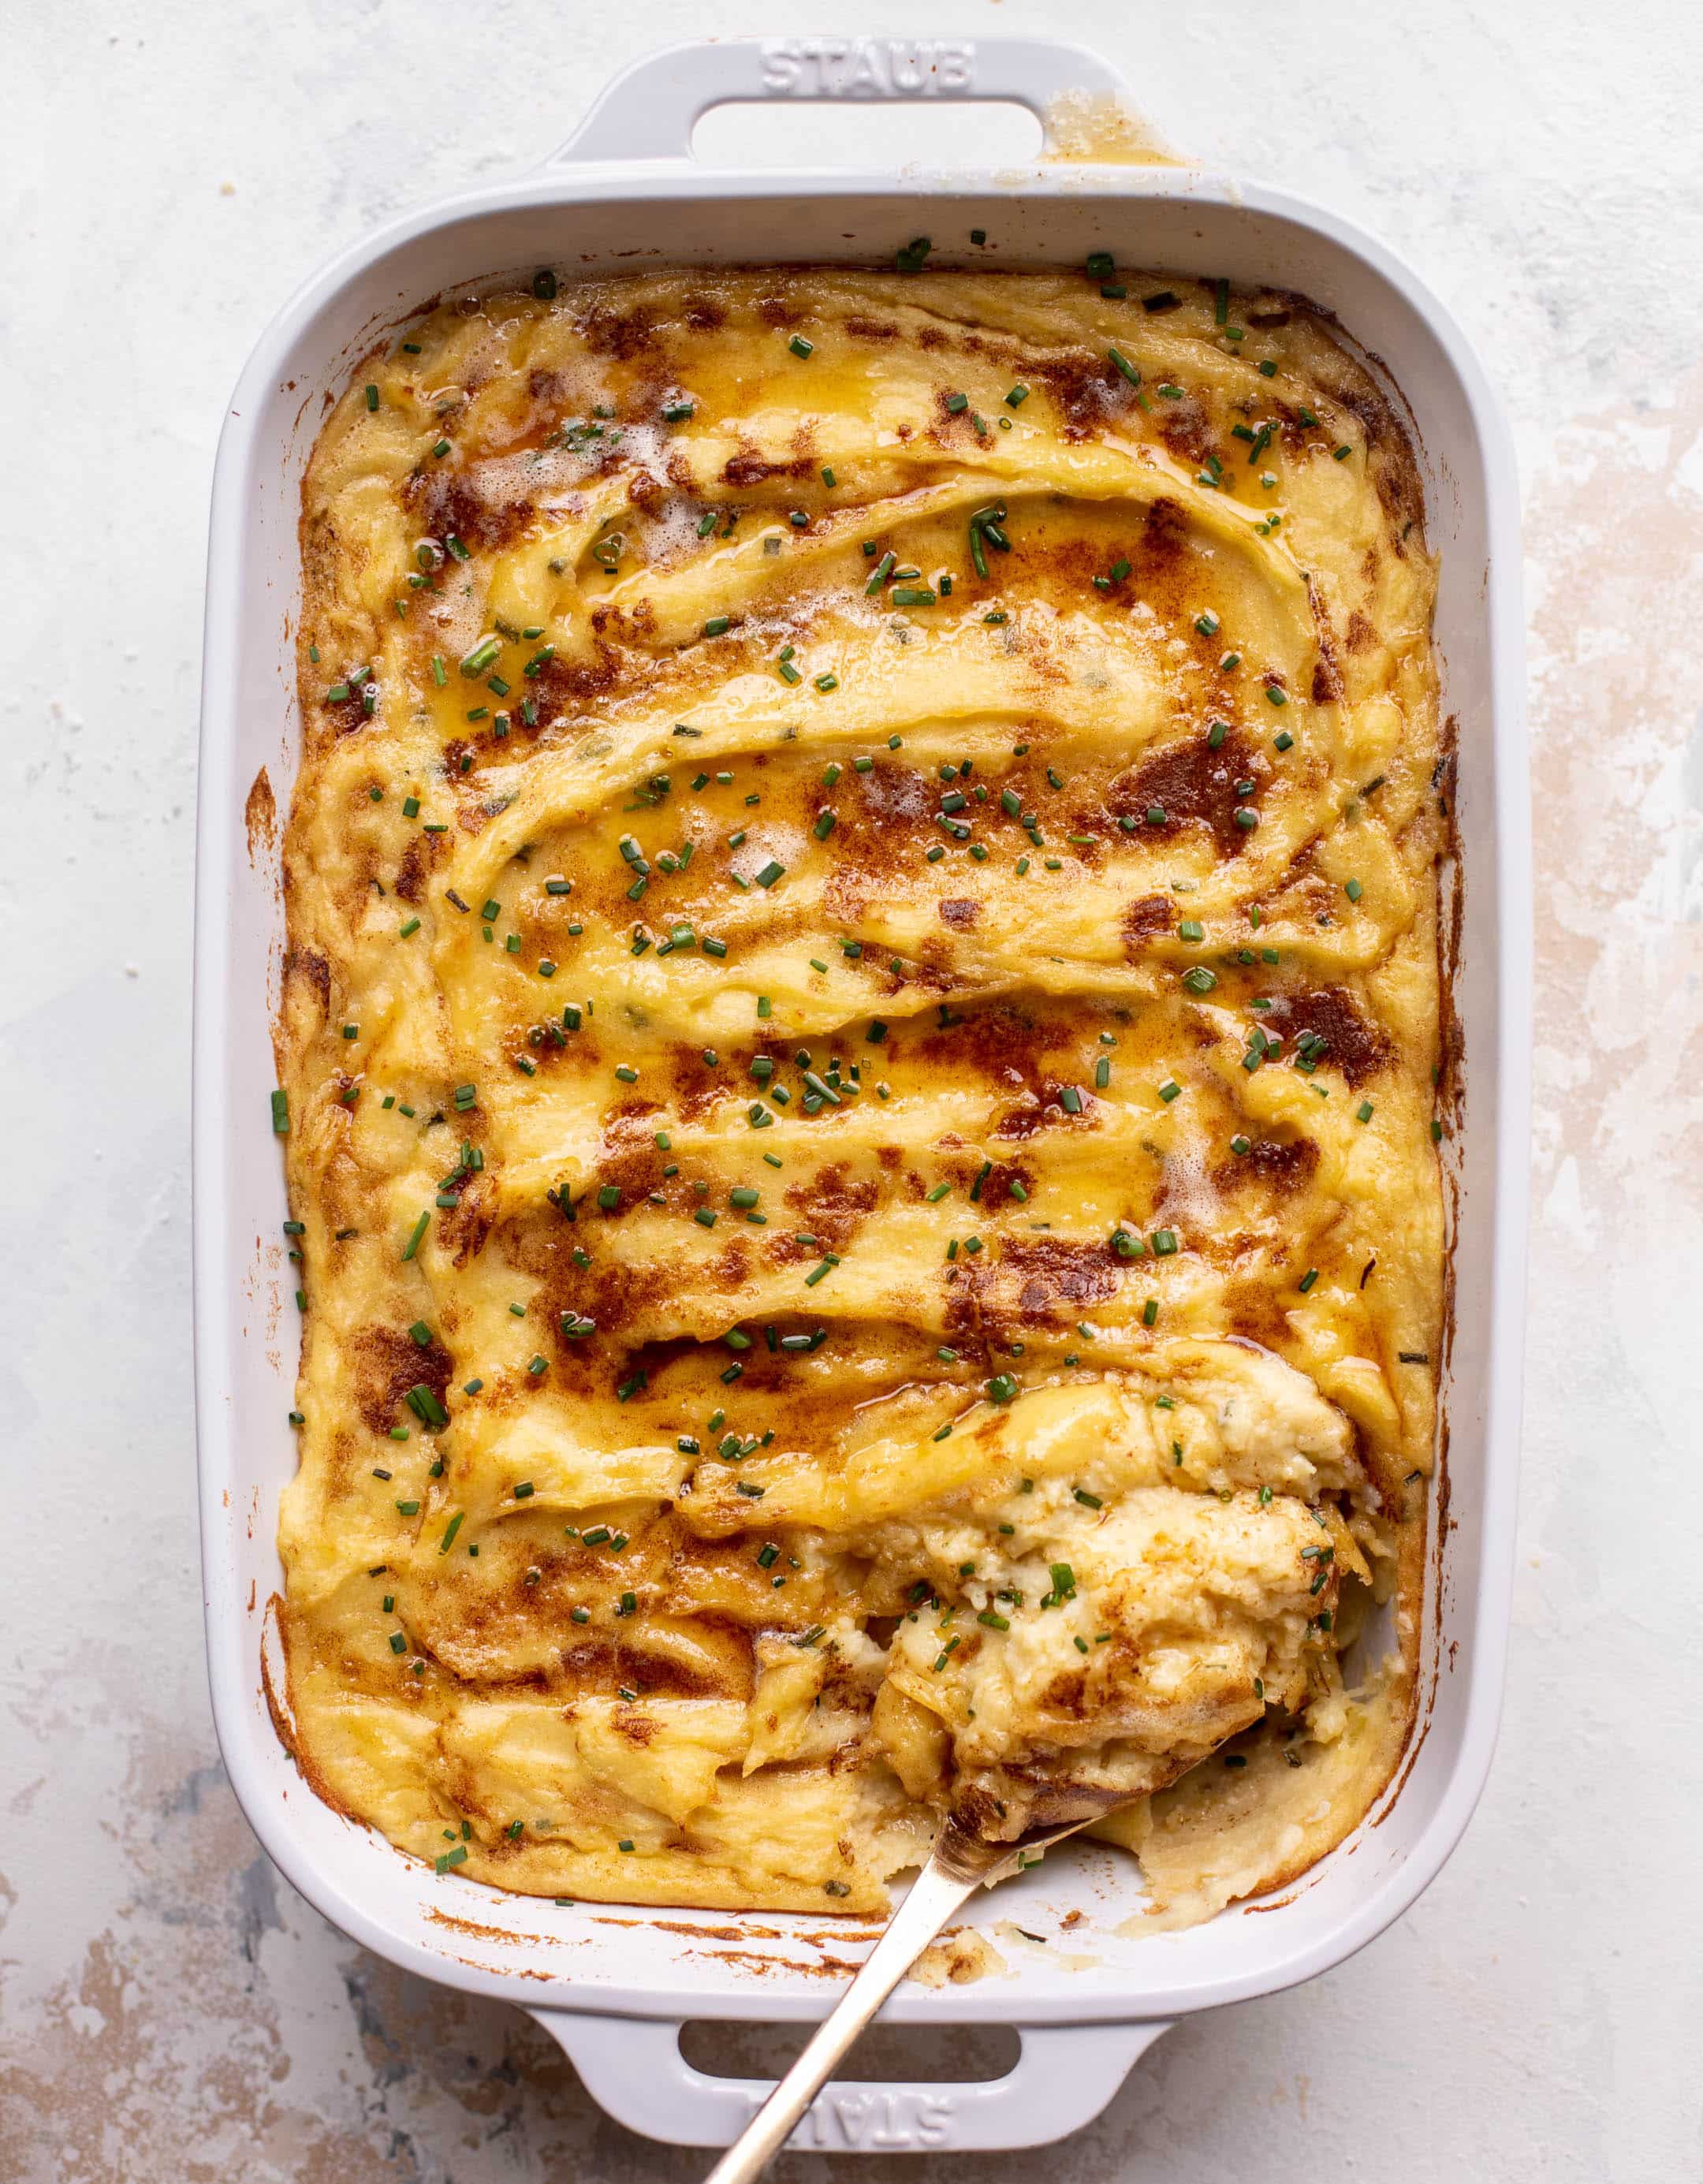 Brown Butter and Herb Mashed Potato Bake.